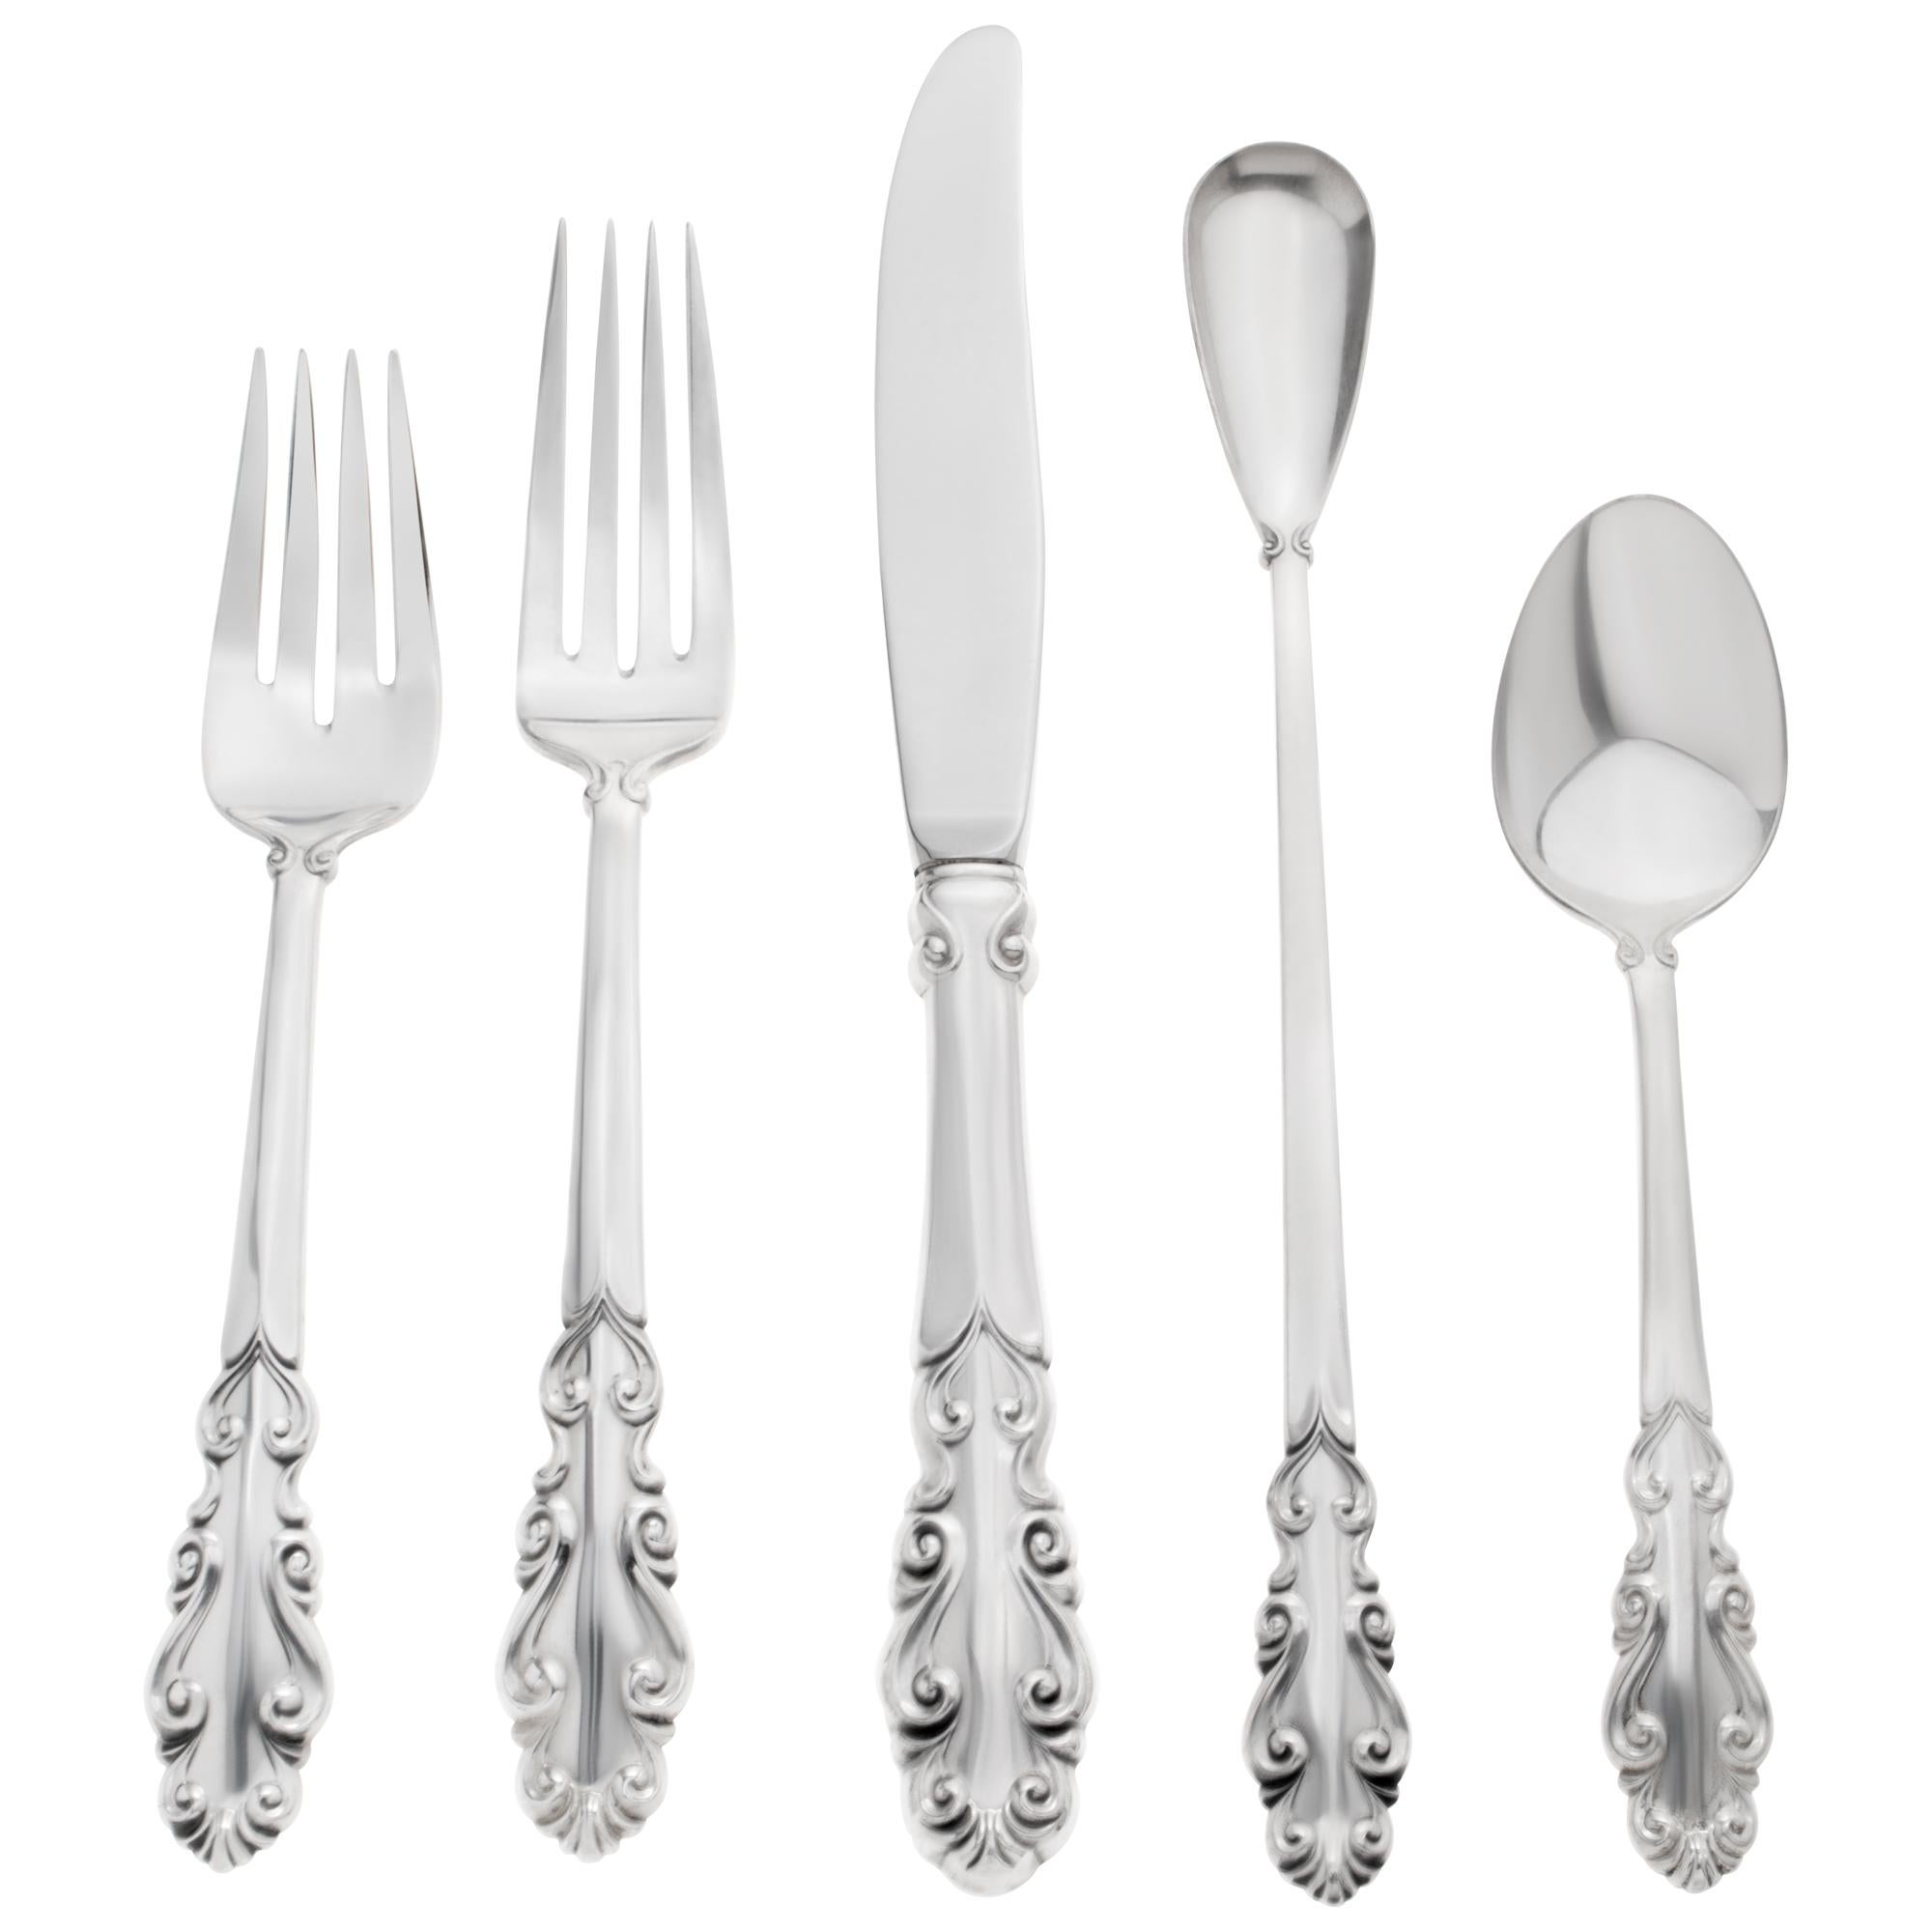 ESPLANADE Sterling silver flatware set patented in 1952 by Towle Silversmiths. 5 place settings for 12. Over 2100  grams sterling silver (67 troy ounces), excluding stainless steel blade knives.PLACE SETTING: 12 dinner knife (9